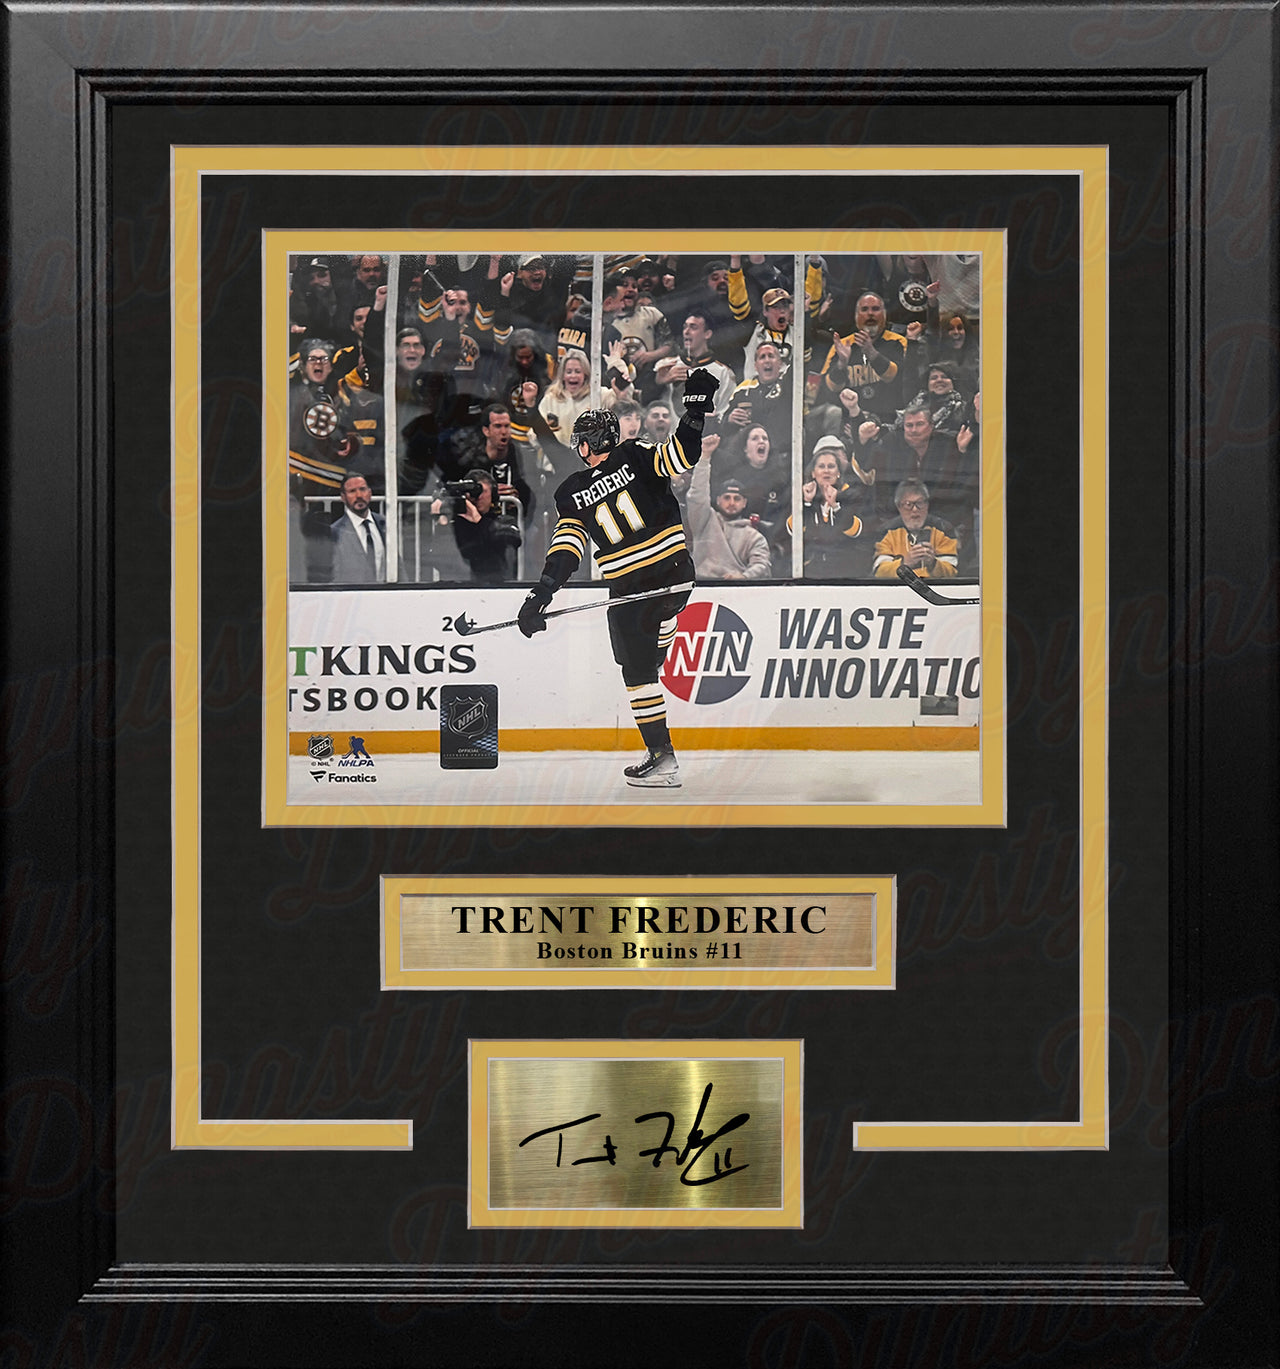 Trent Frederic Goal Celebration Boston Bruins 11" x 14" Framed Hockey Photo with Engraved Autograph